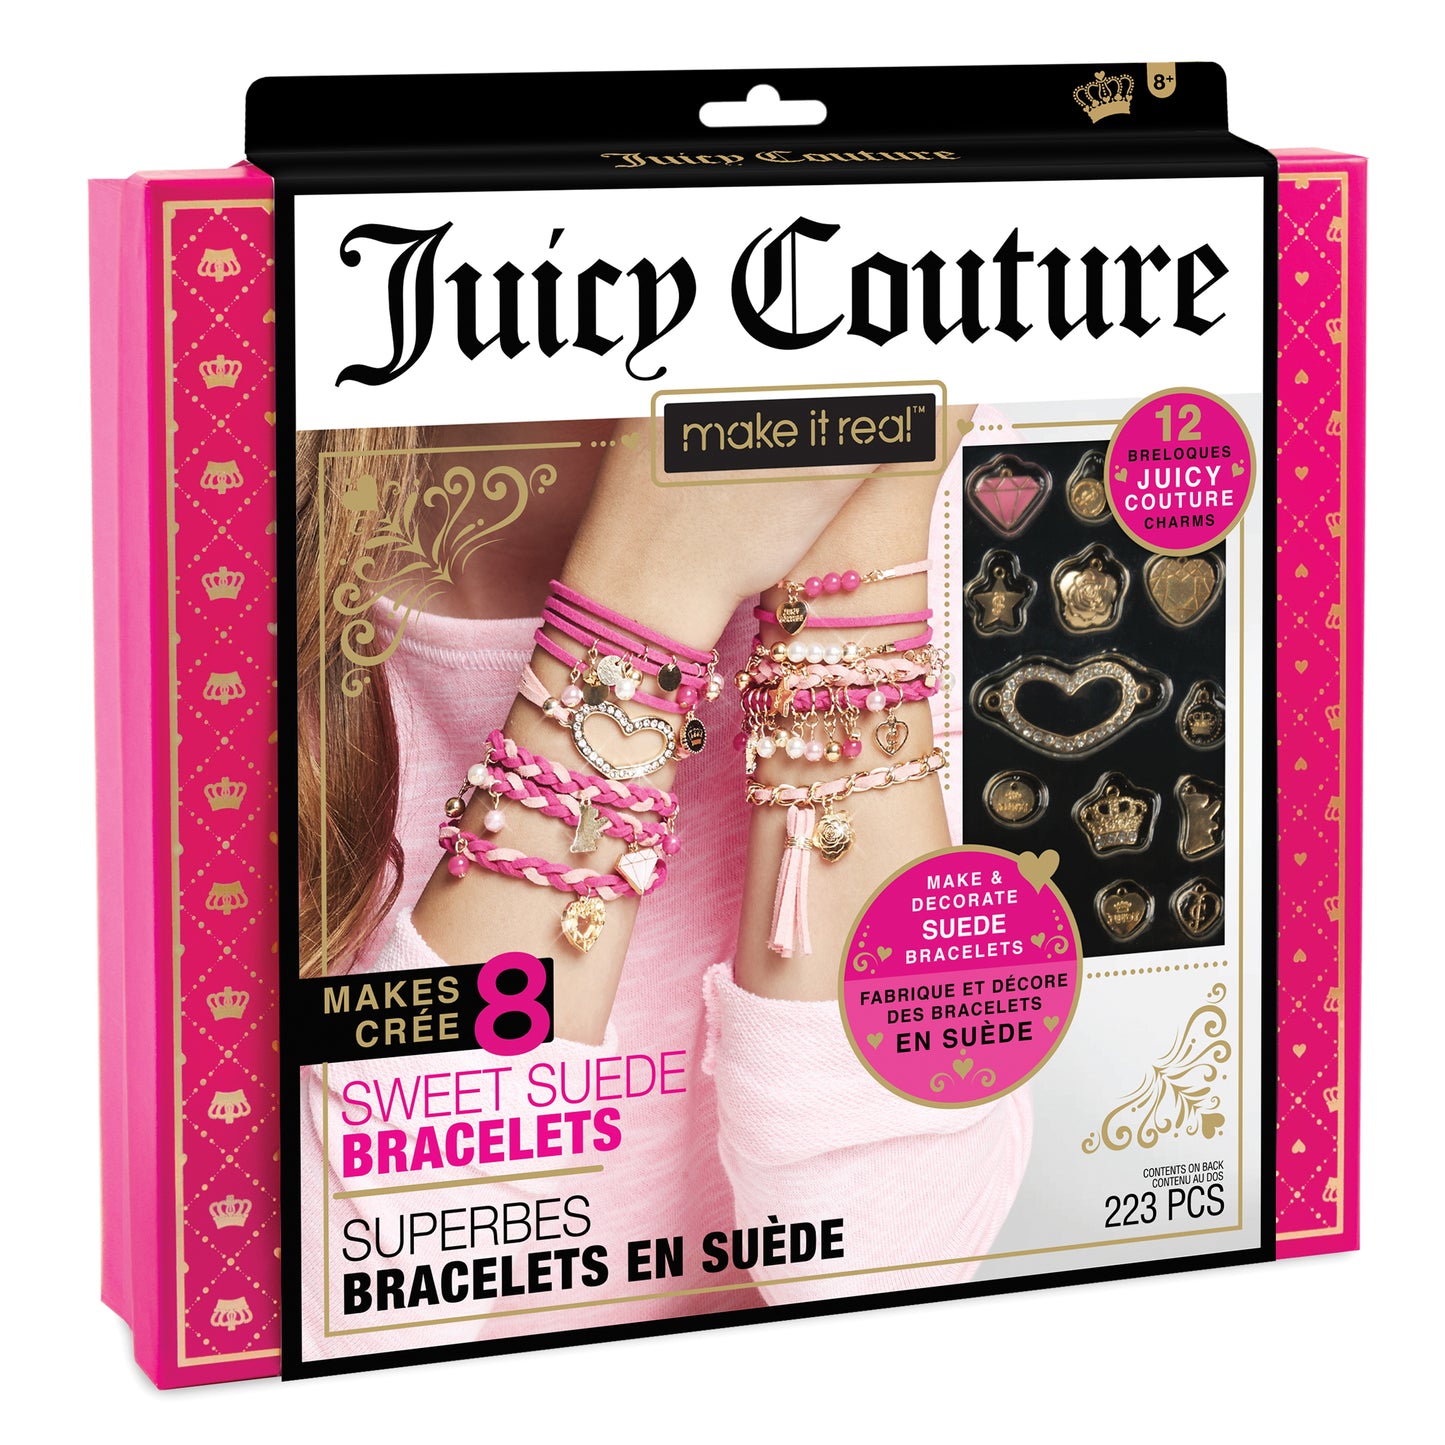 Juicy Couture™ Sweet Suede Bracelets